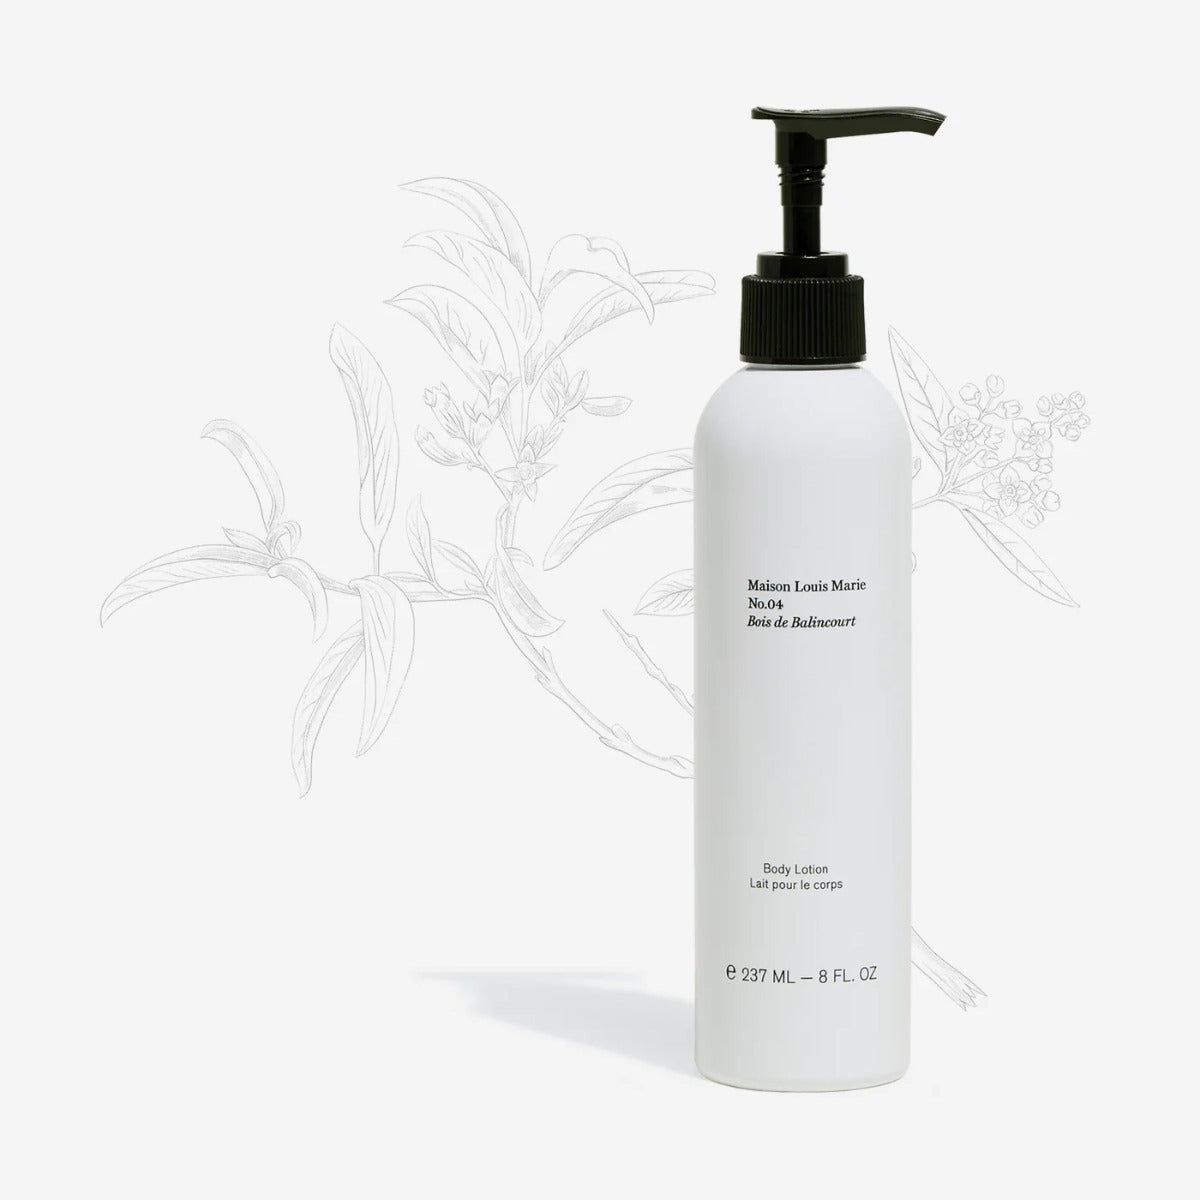 Body and Hand Lotion - Bois de Balincourt